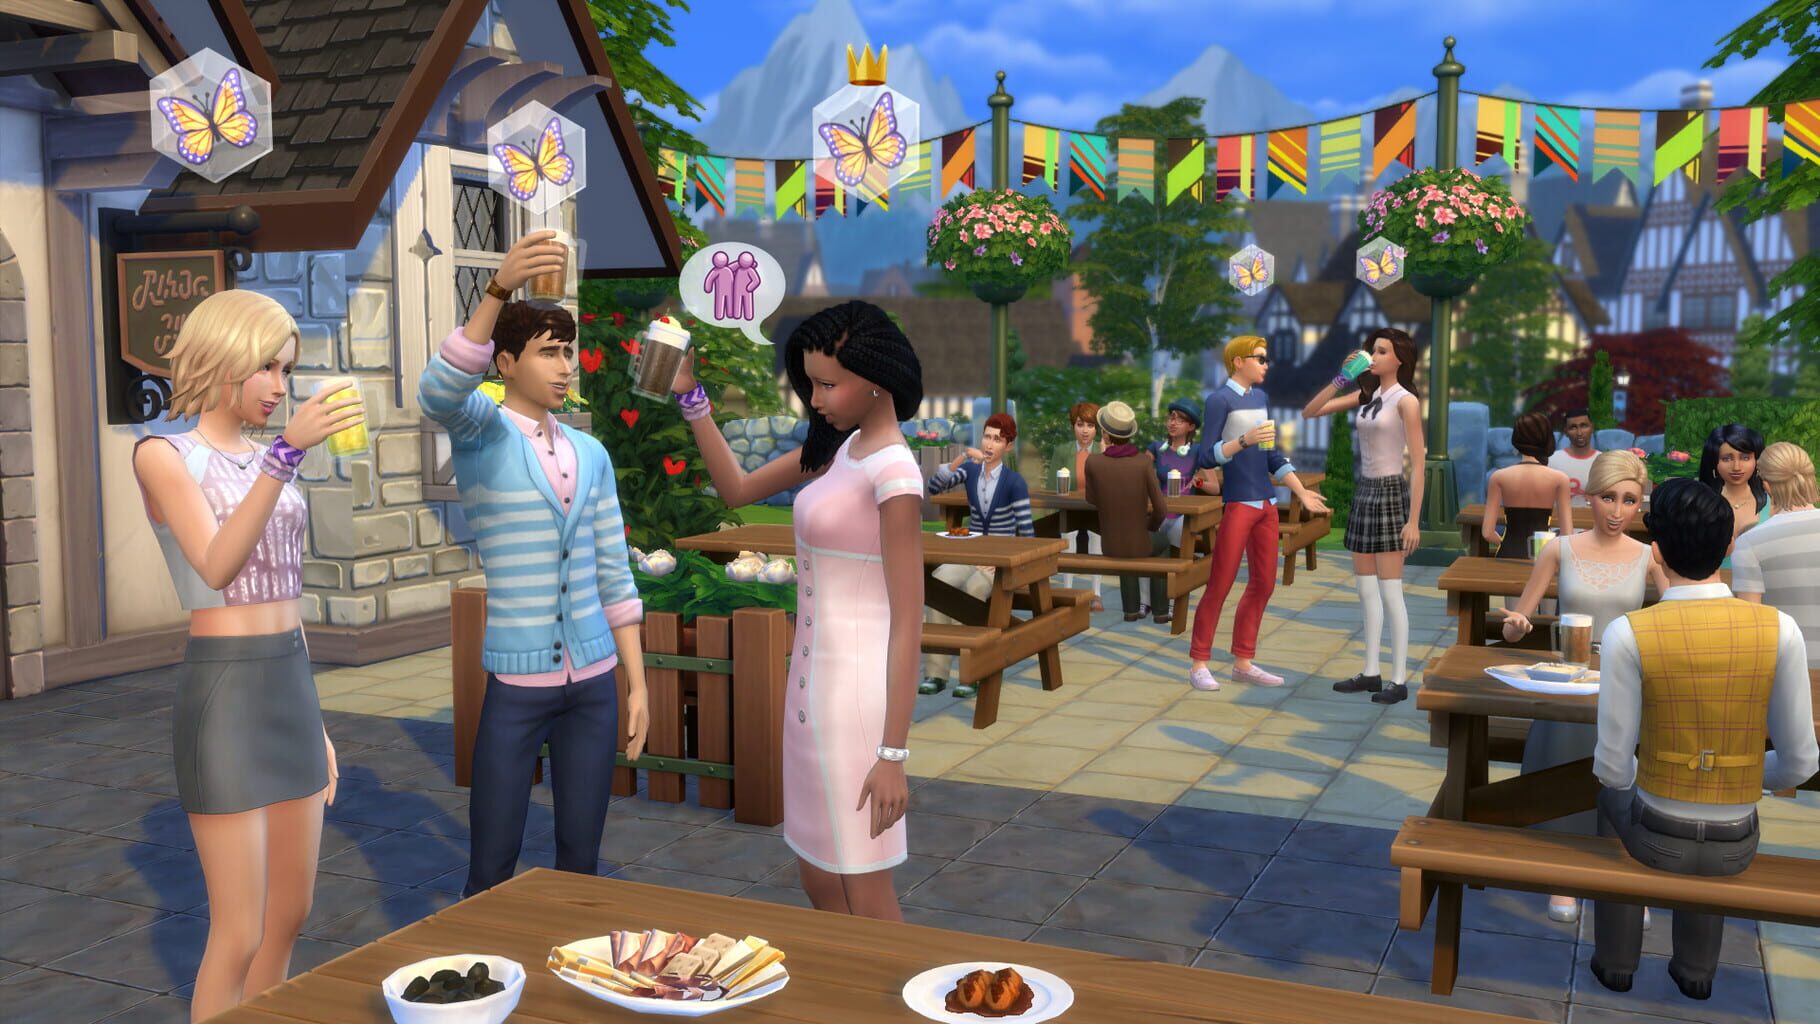 The Sims 4: Get Together Image